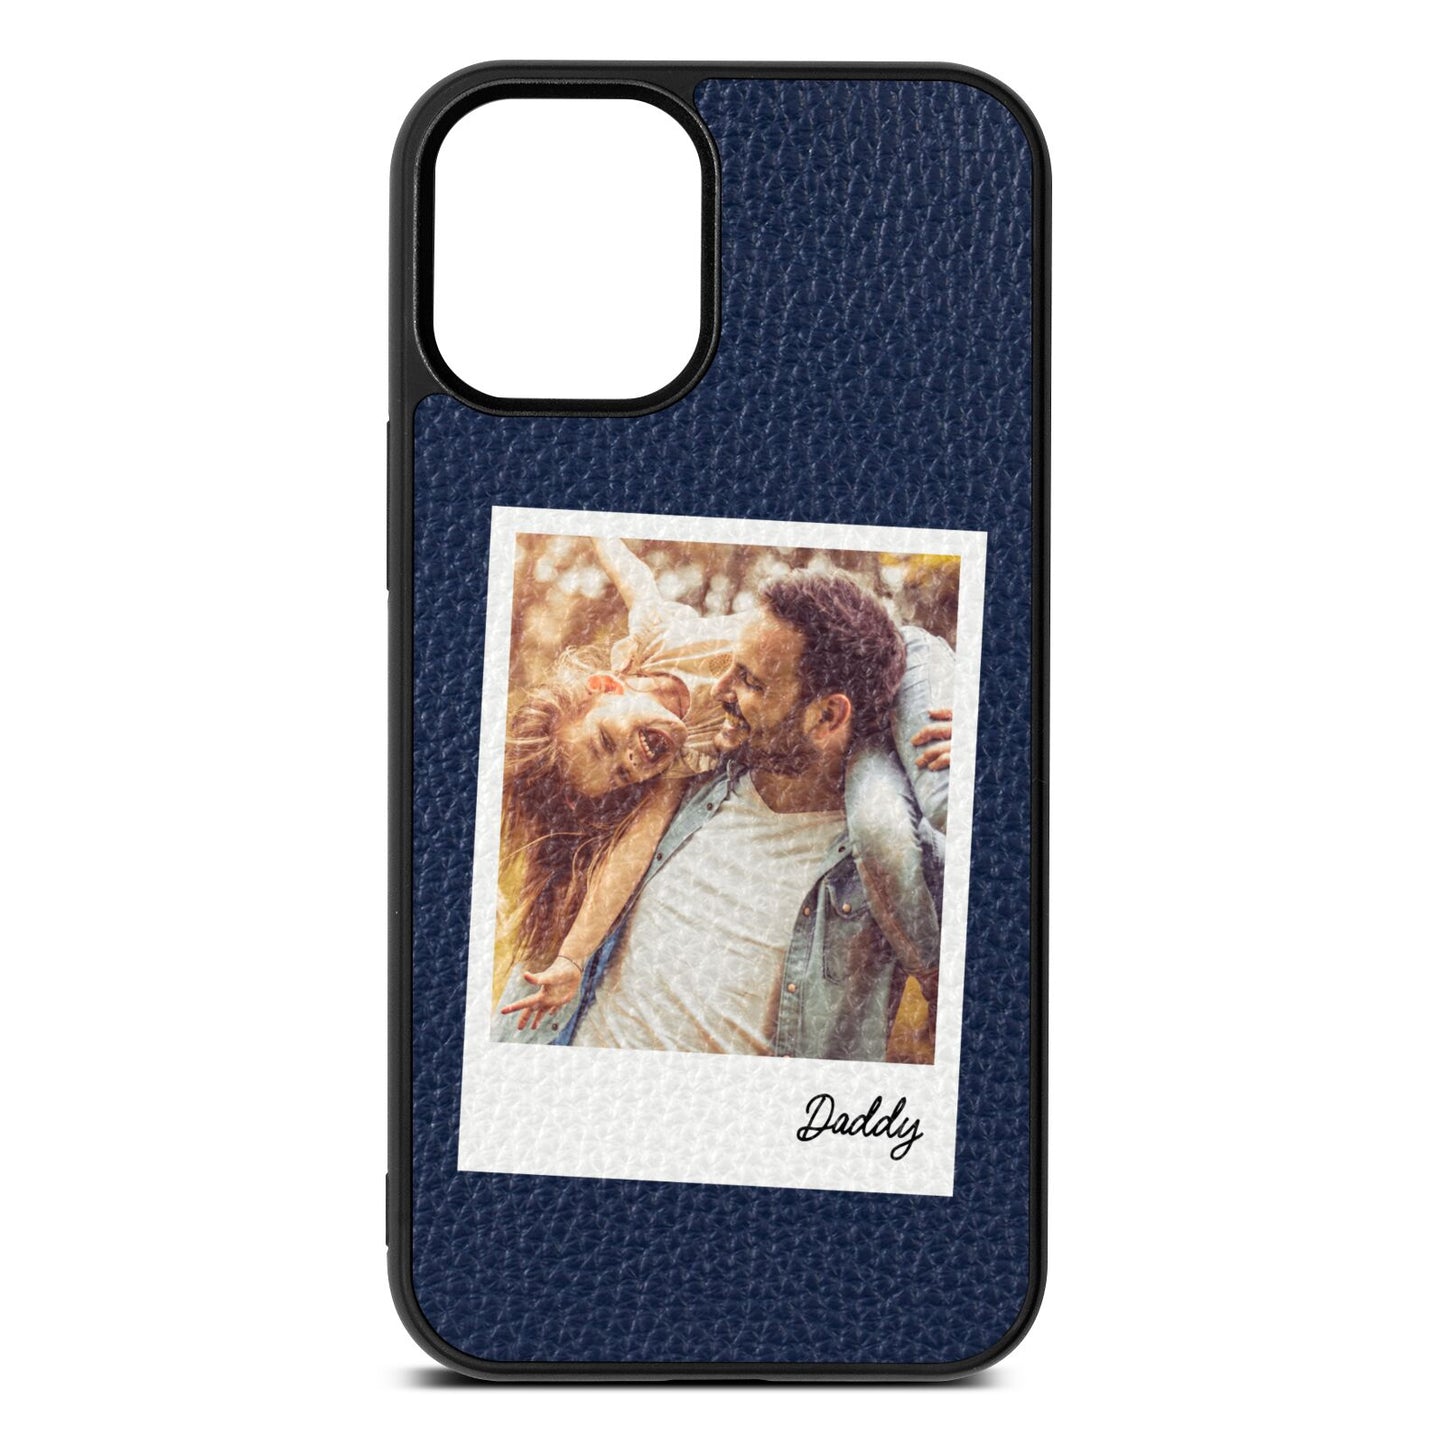 Fathers Day Photo Navy Blue Pebble Leather iPhone 12 Mini Case